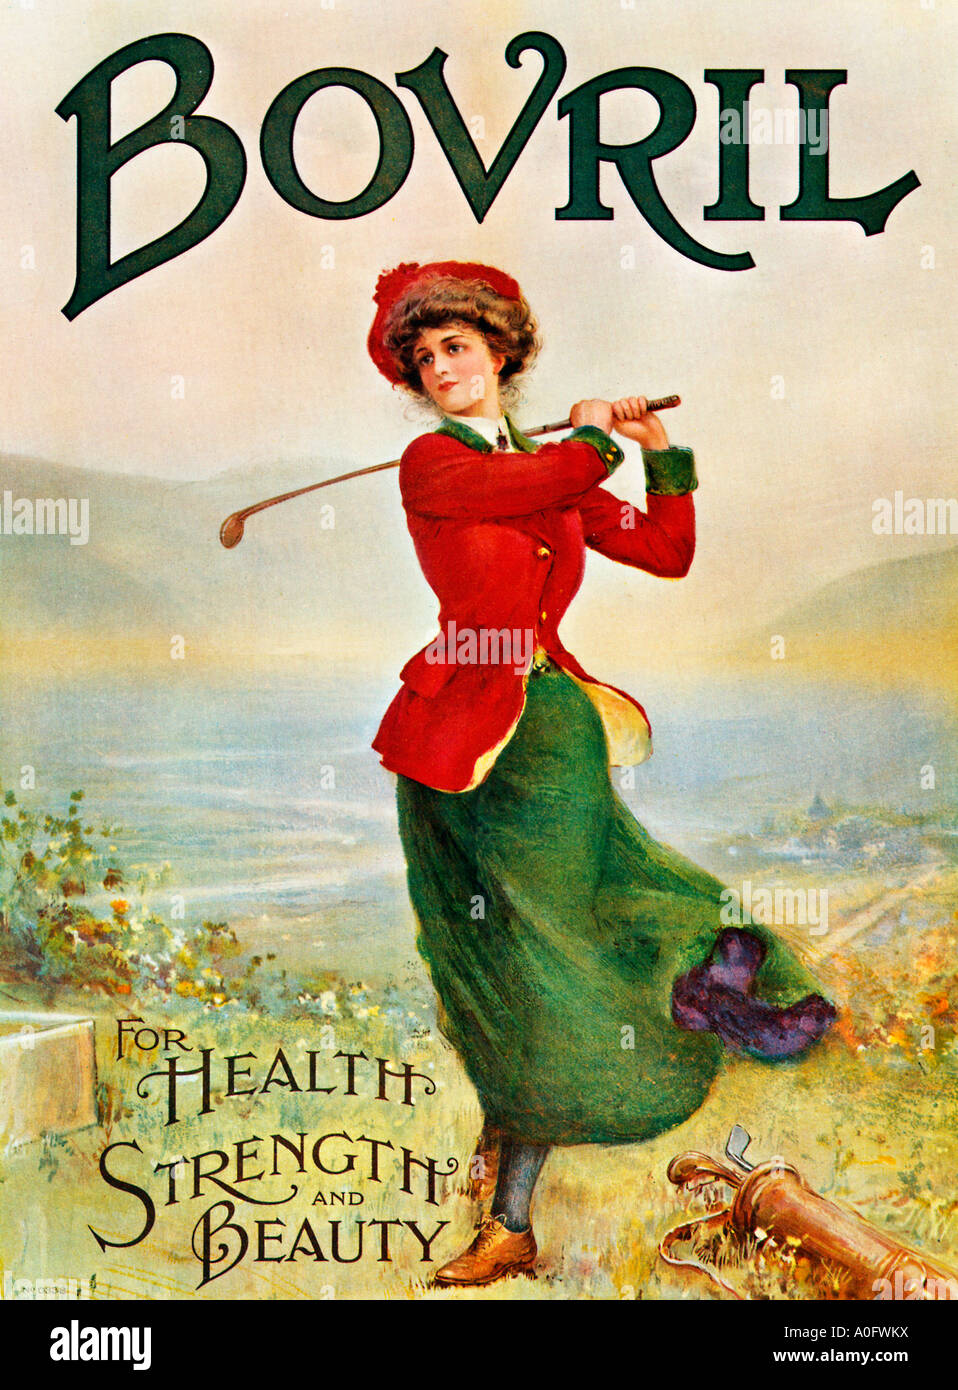 Bovril Health Strength and Beauty Edwardian advert for the beef extract with the lady golfer exhibiting all of those Stock Photo